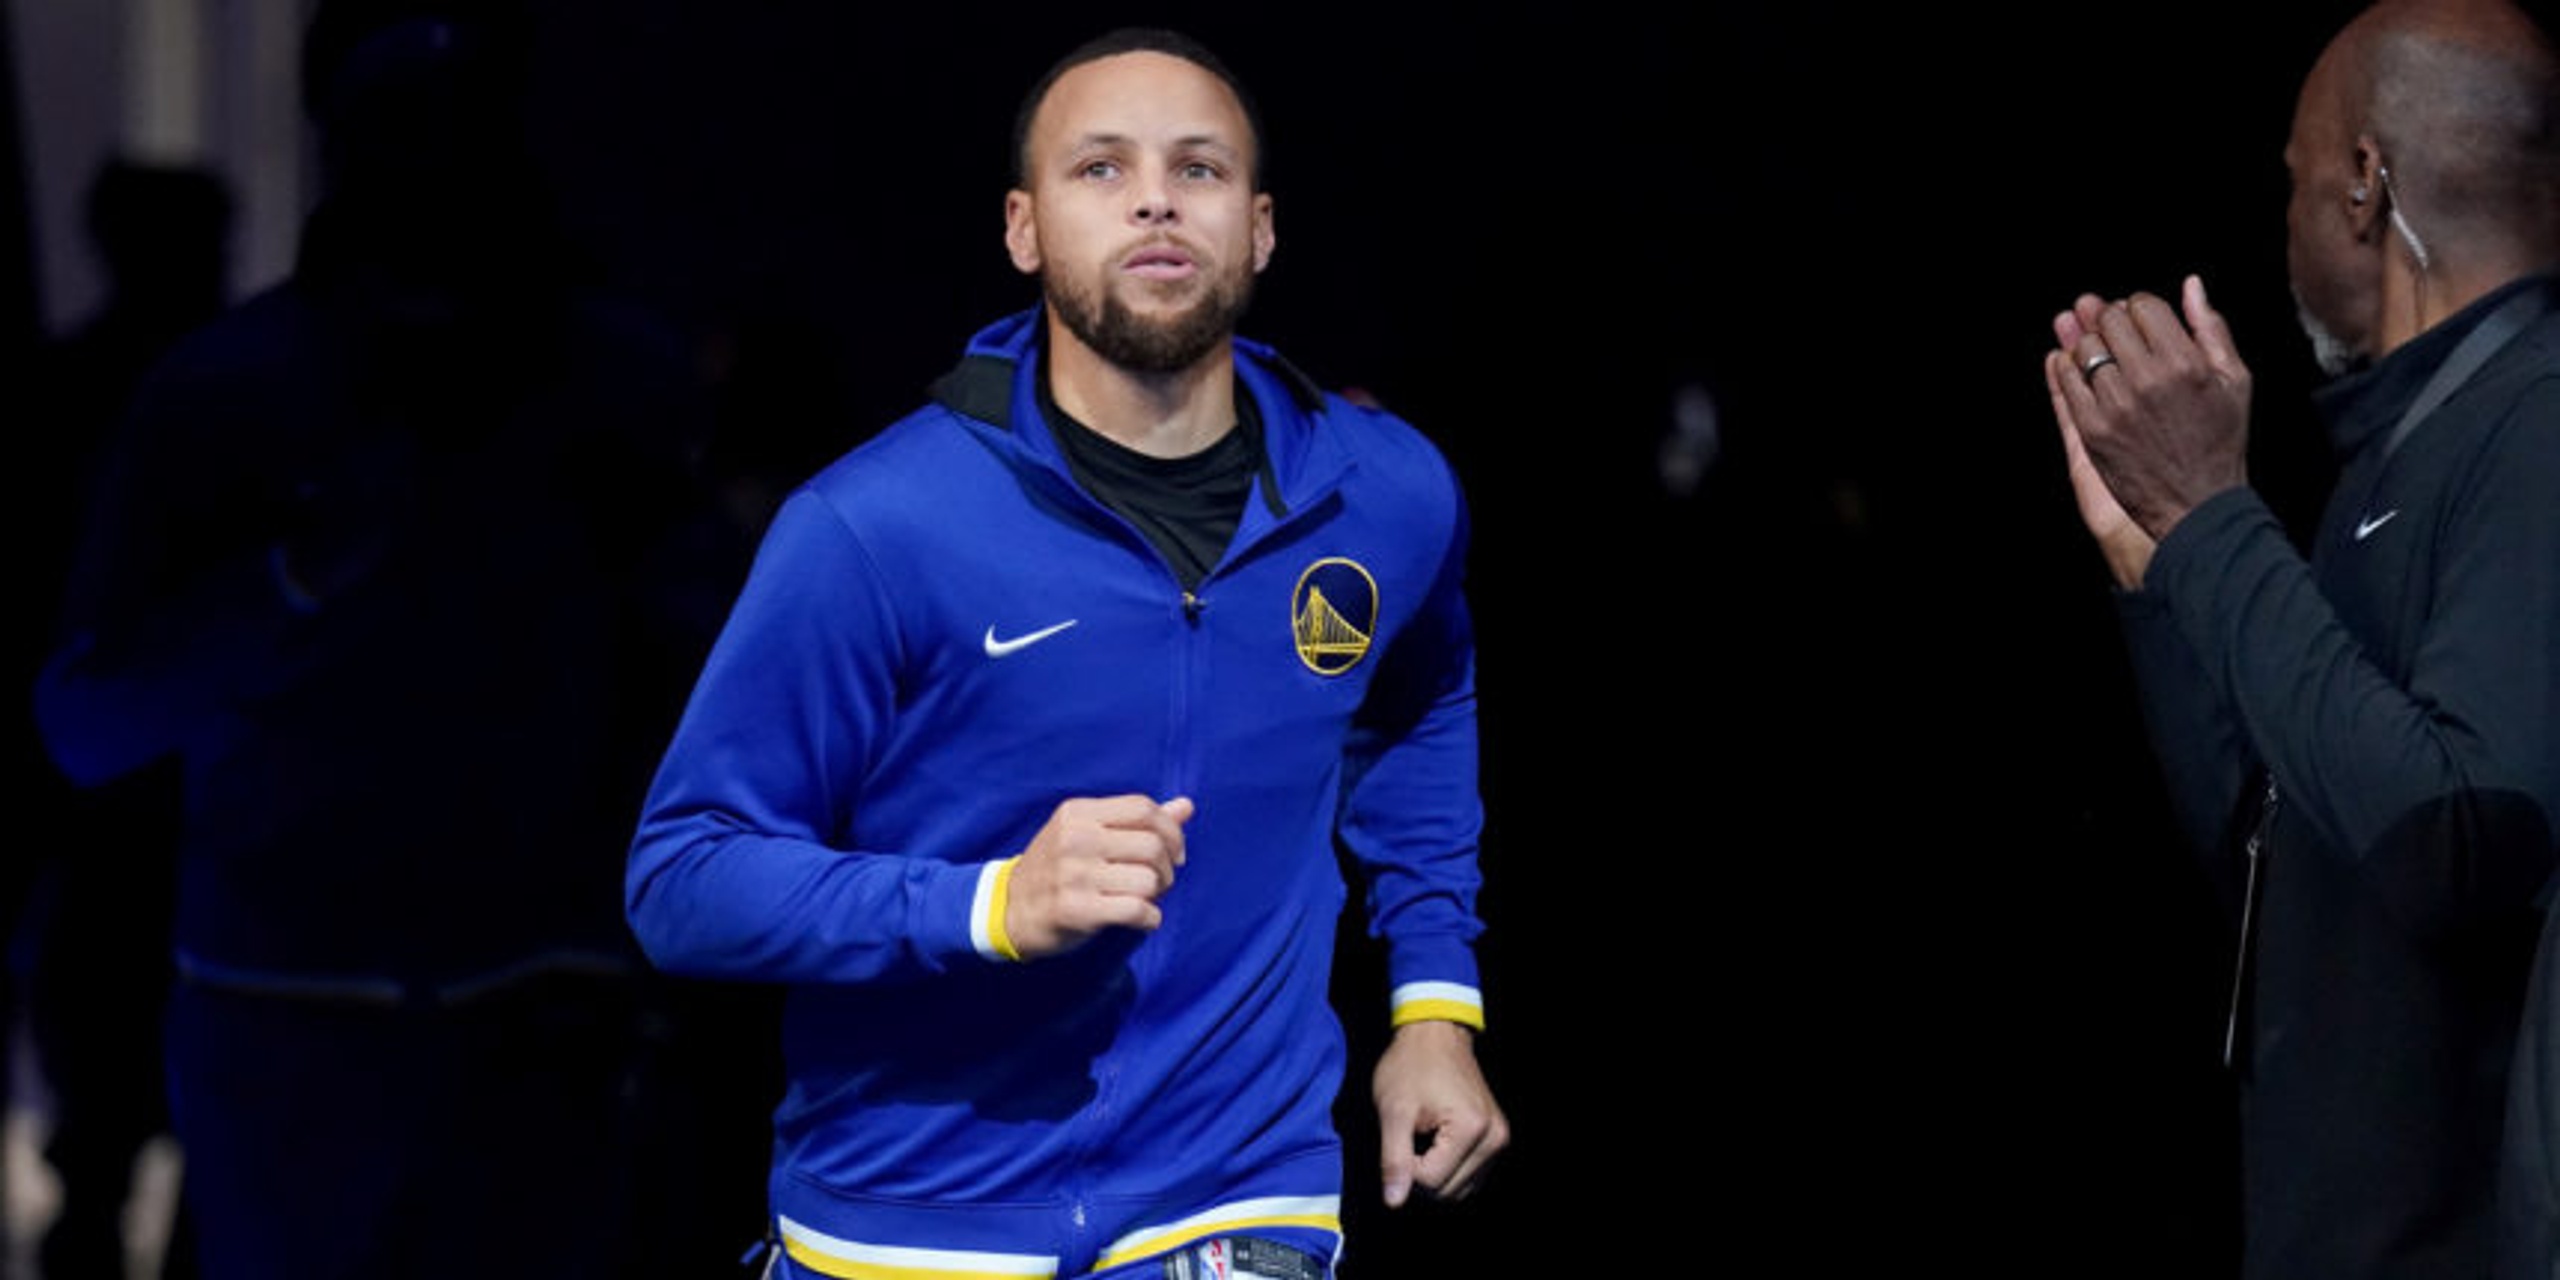 Stephen Curry earns sociology degree from Davidson College